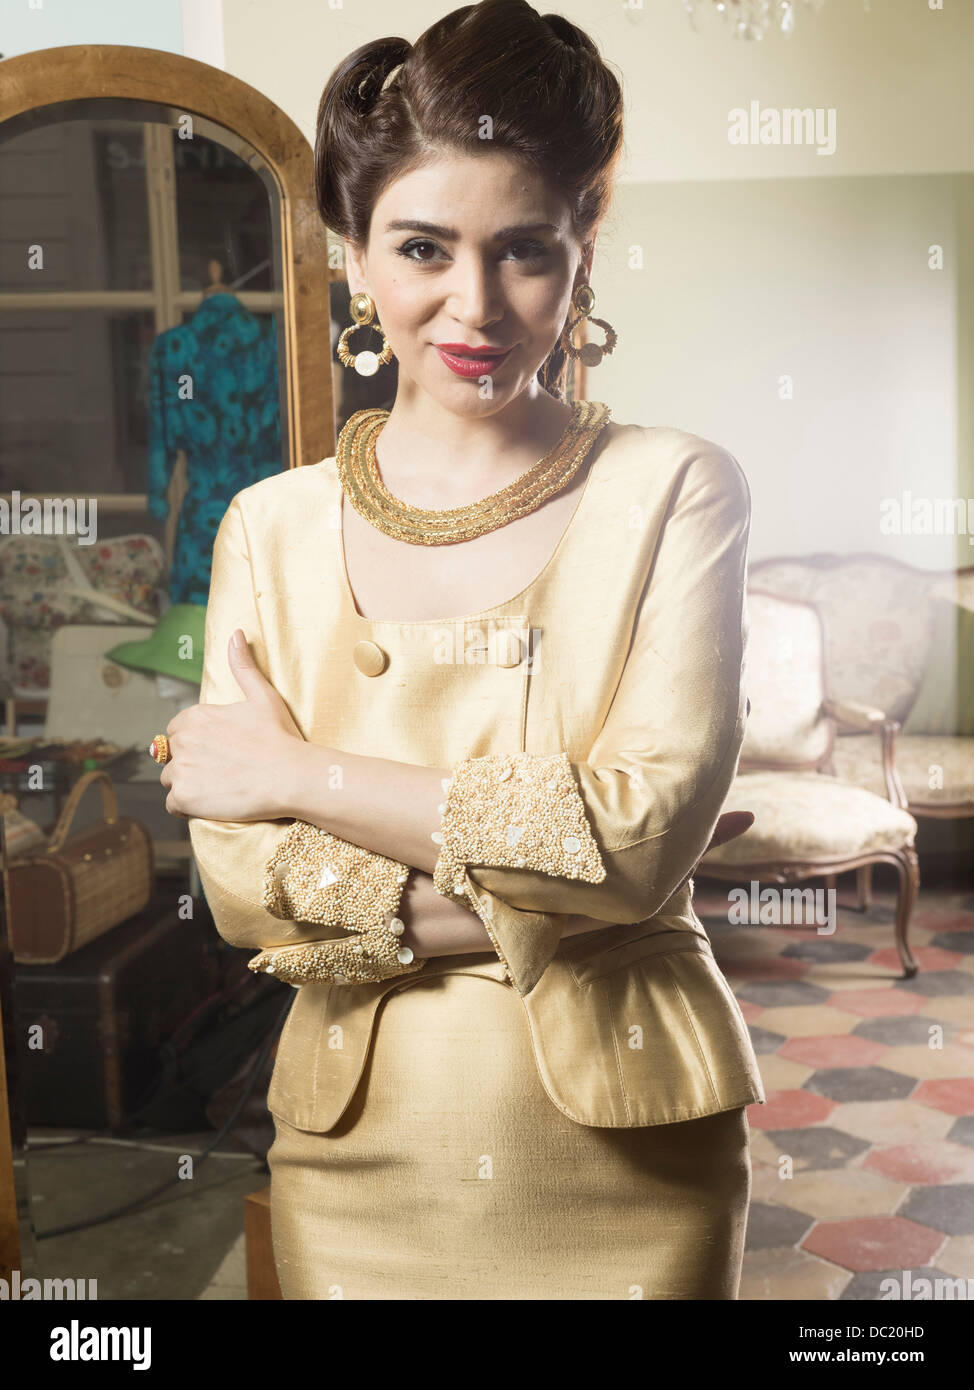 Portrait of woman in vintage clothes Stock Photo